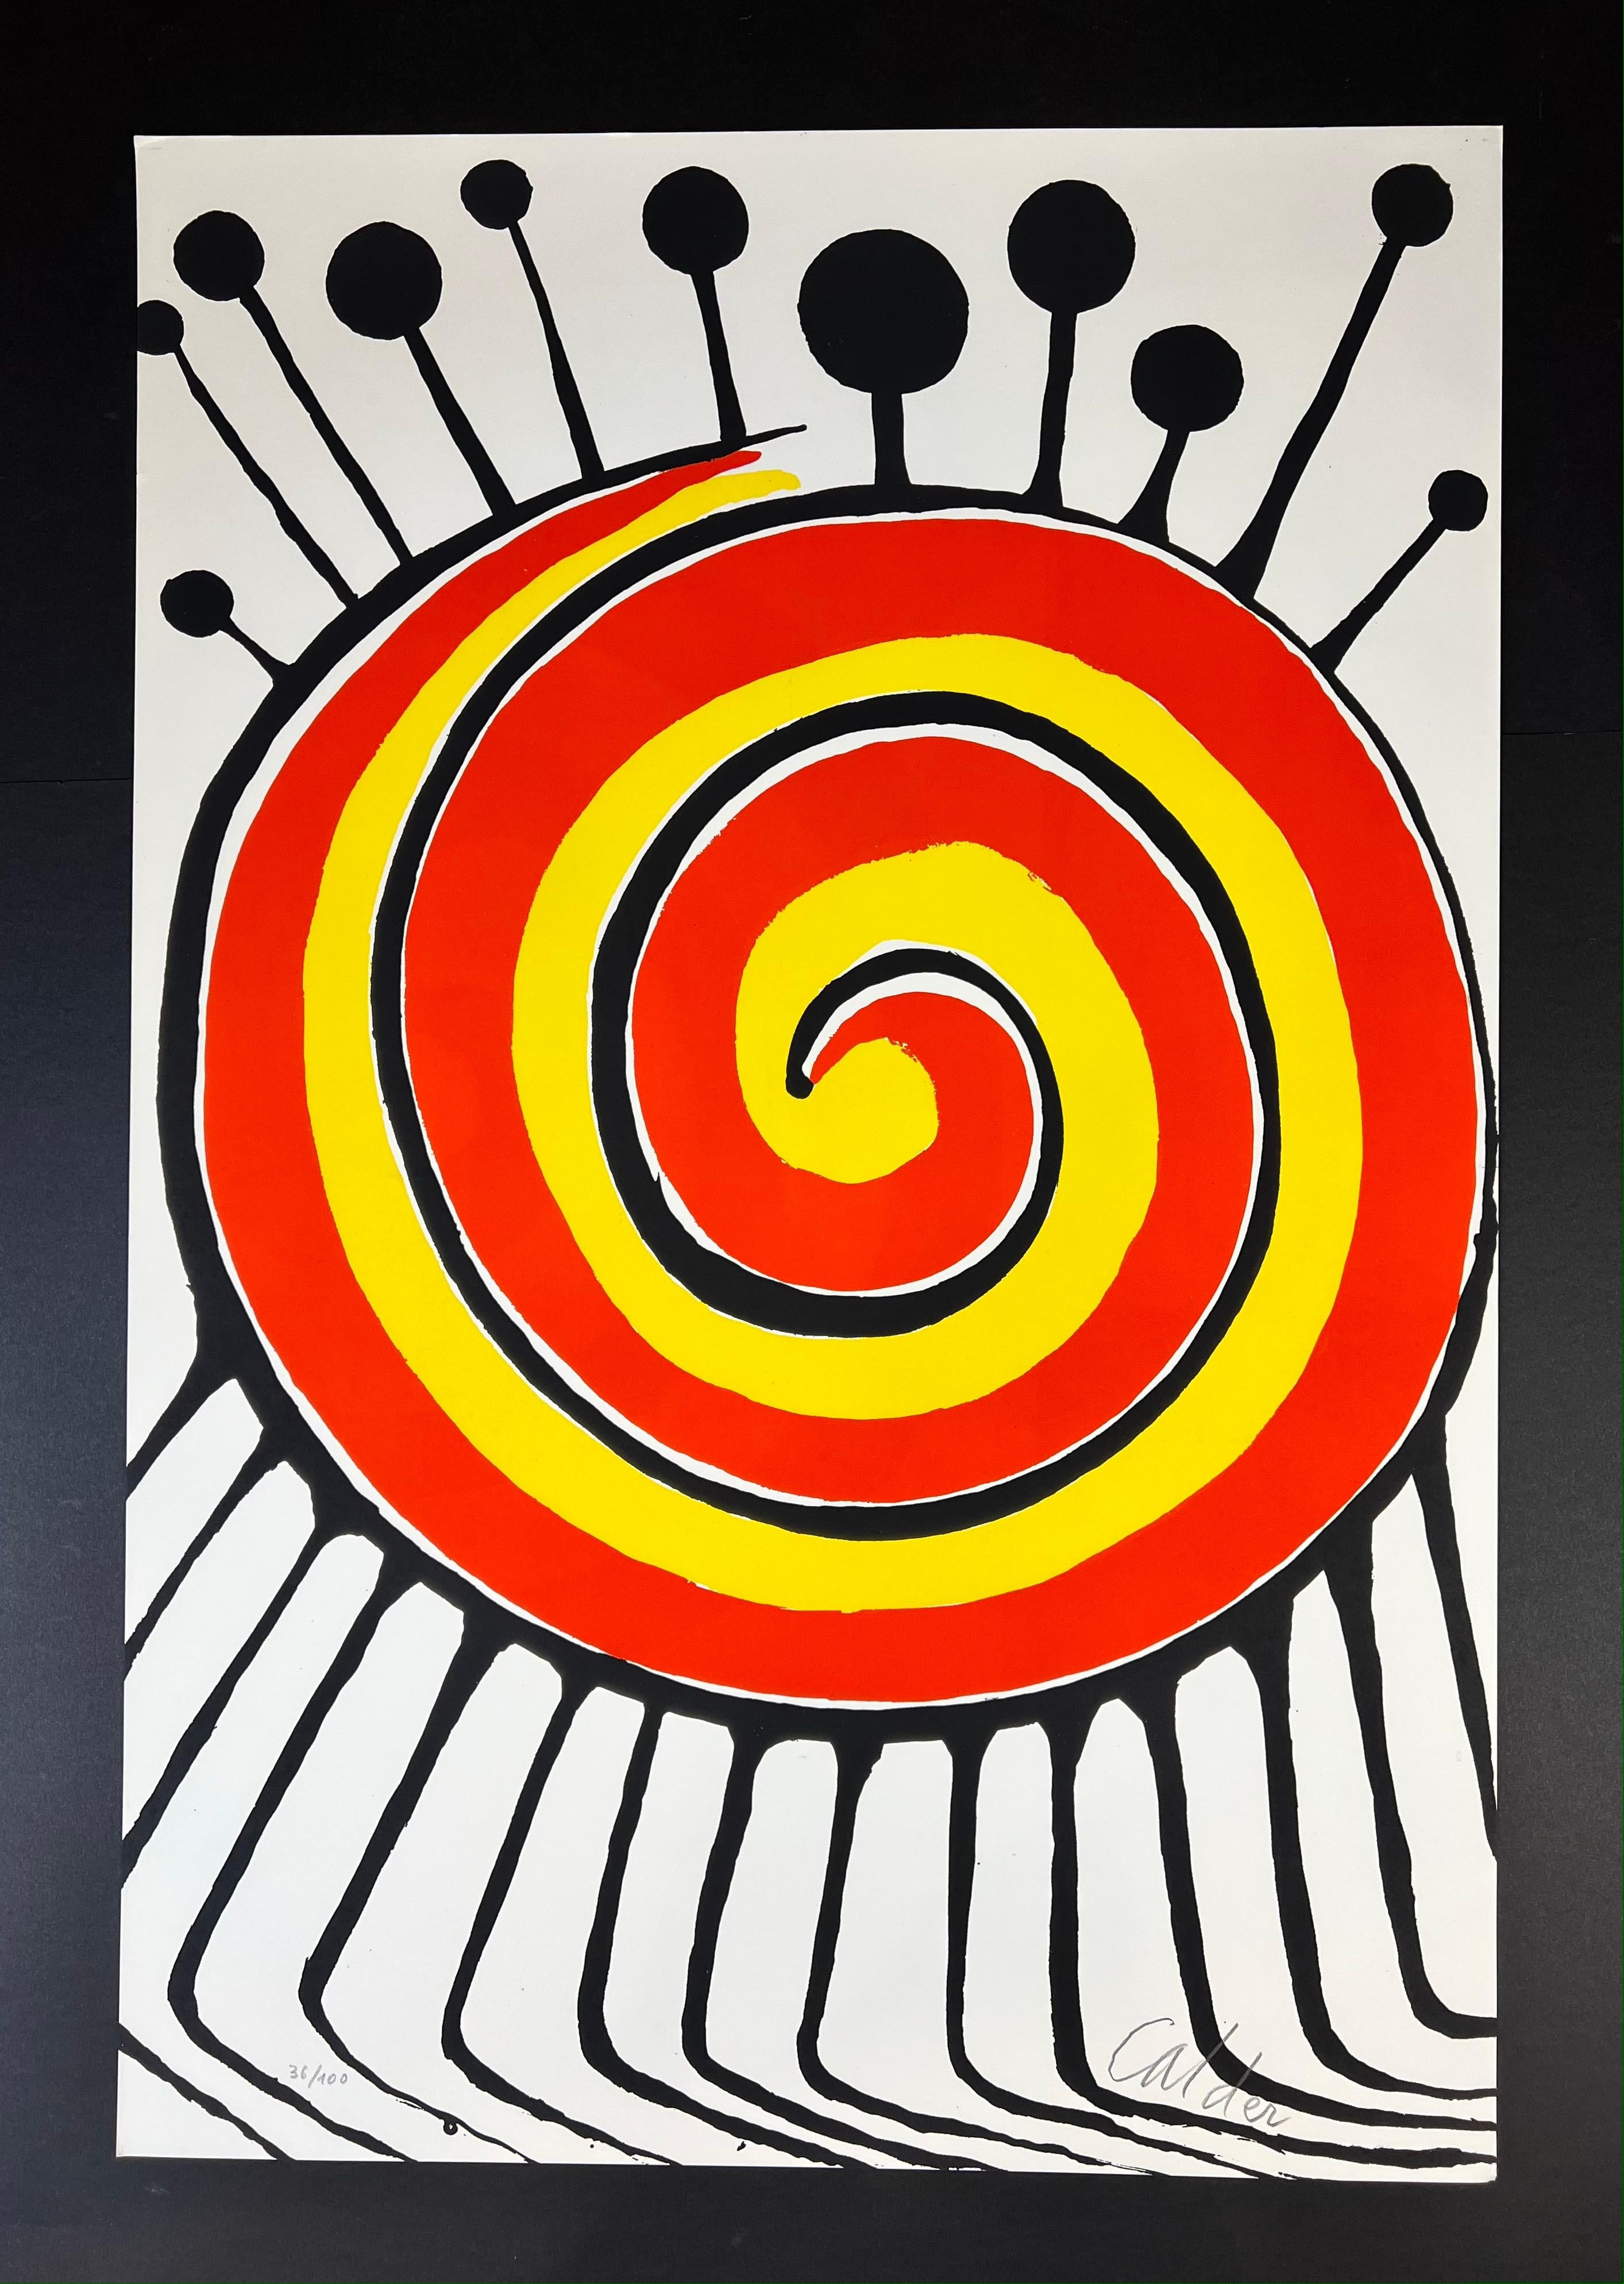 Alexander Calder ( 1898 - 1976 ) - Spirale millepiedi - hand-signed lithography, 1972

Additional information:
Material: color lithography on paper
Edited in 1972
Limited edition in 100 copies
Signed in pencil by artist in lower right